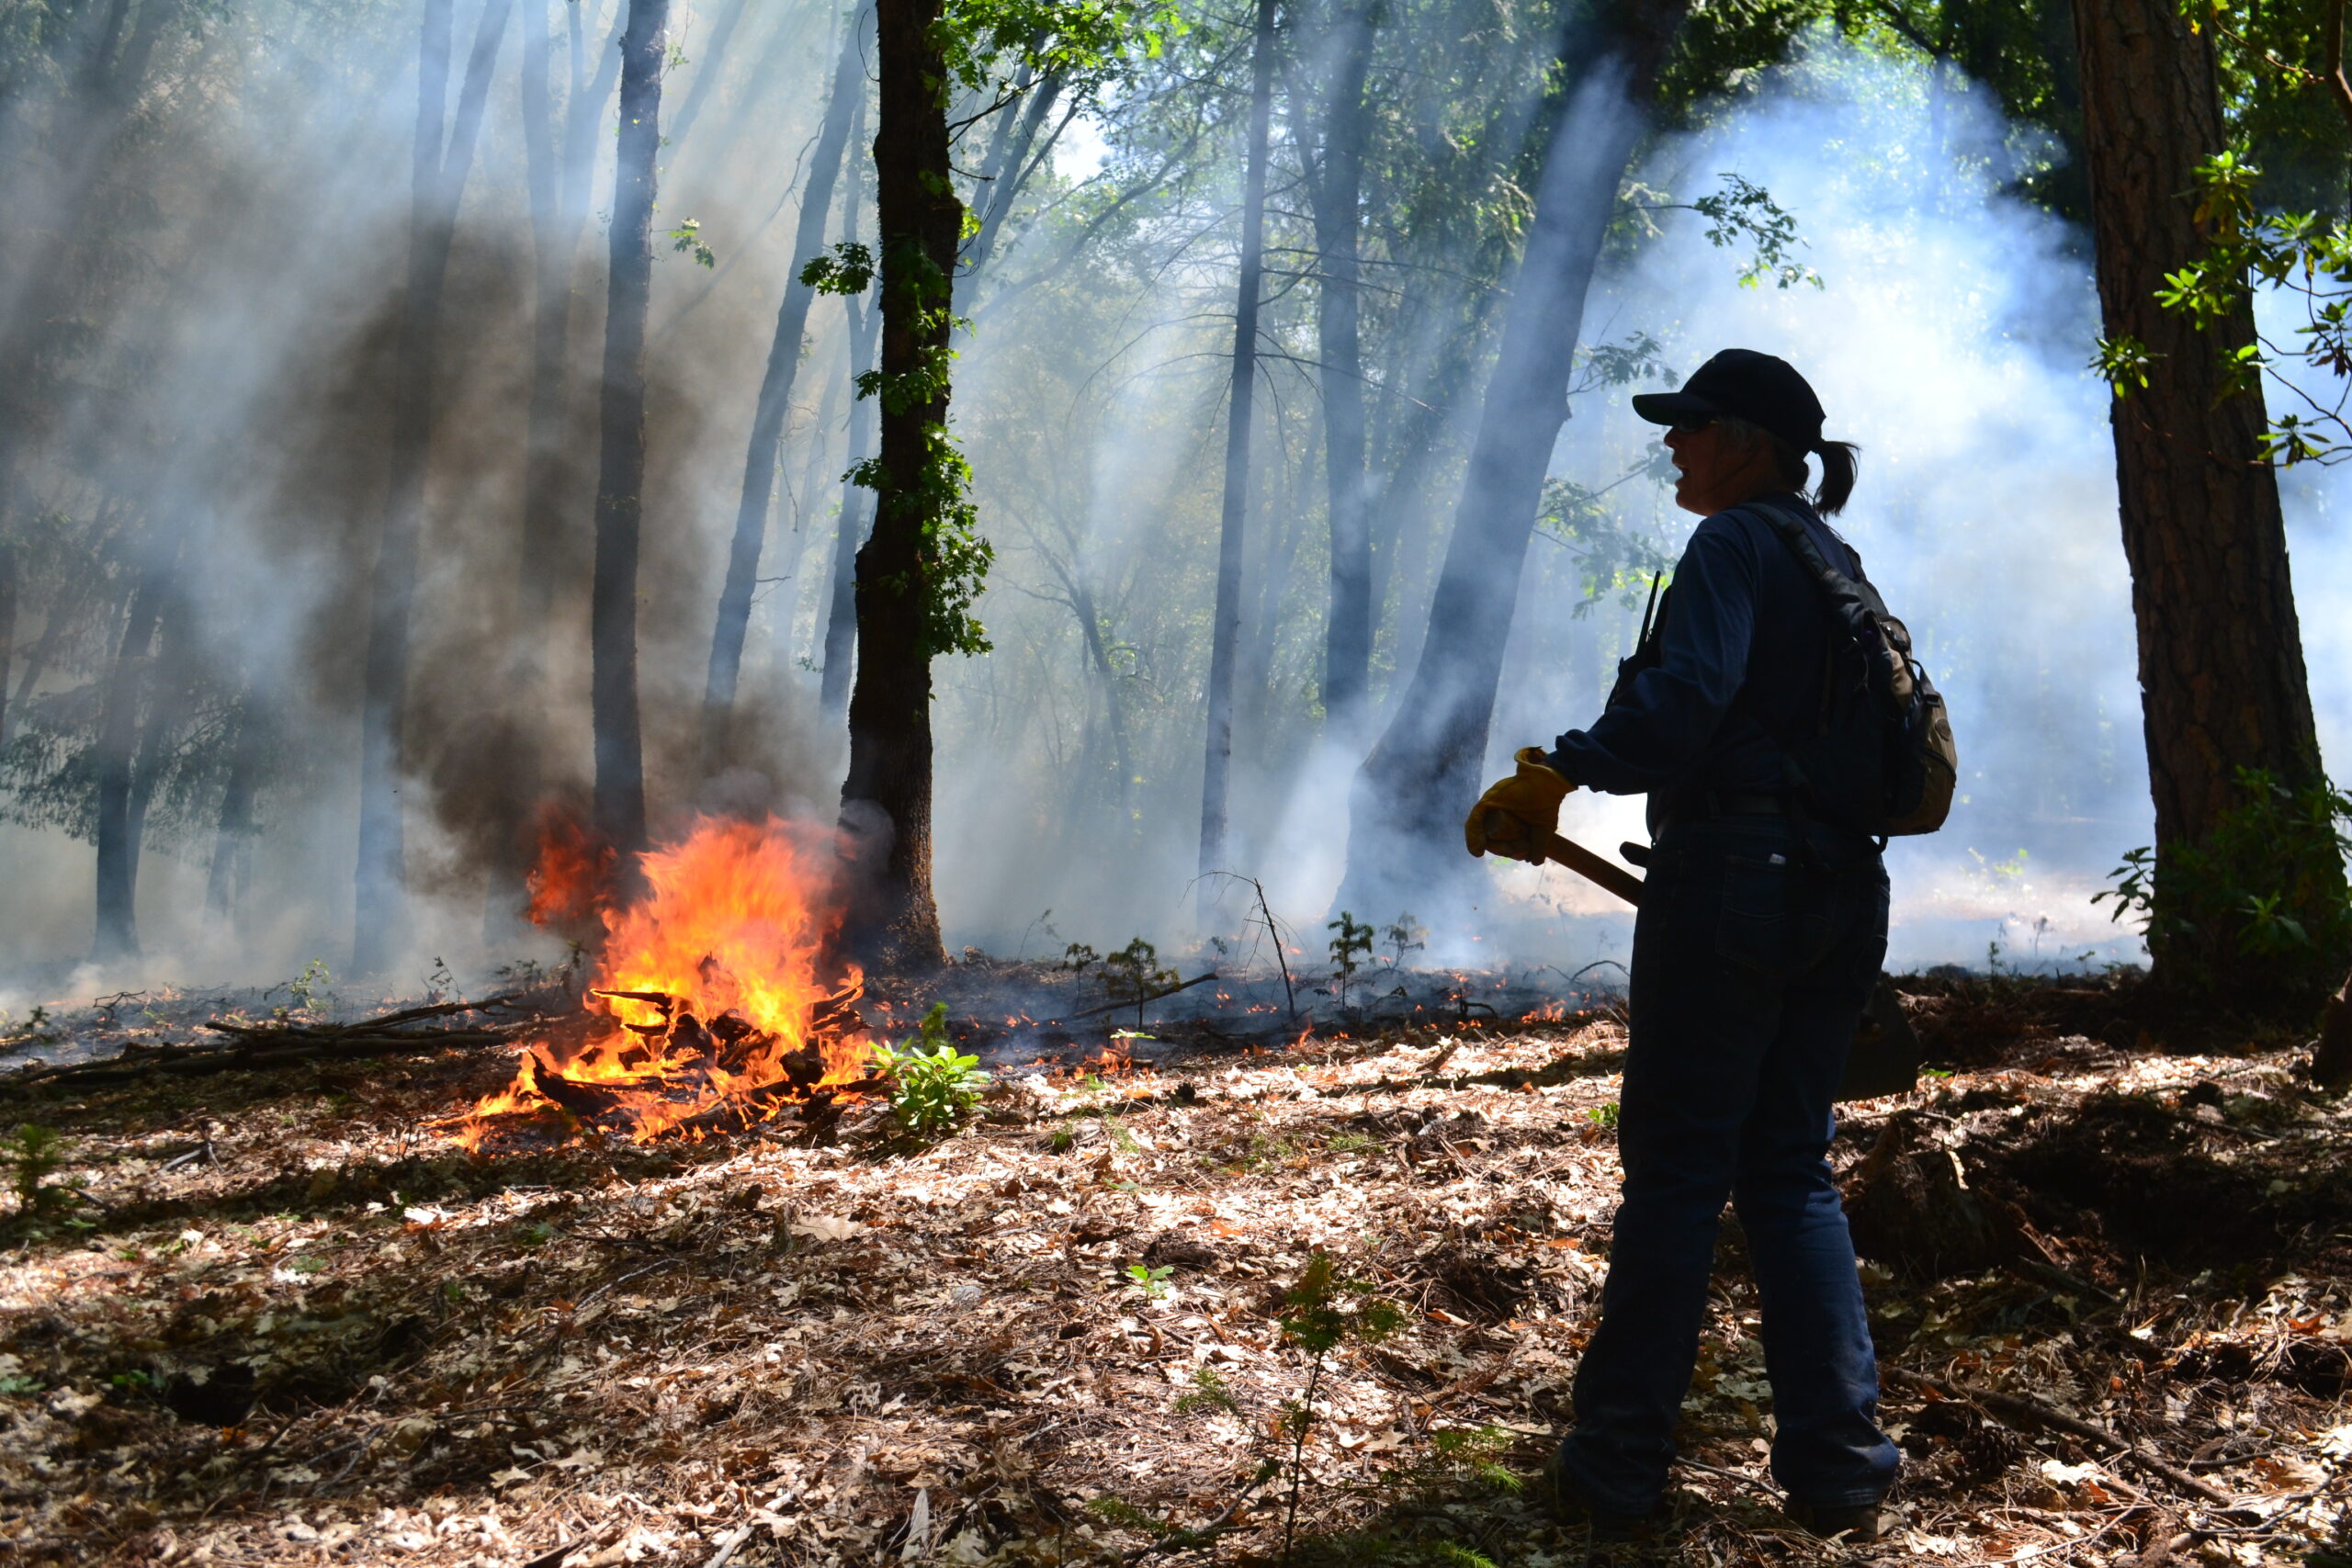 Jo Ann Fires of Nevada County RCD at a prescribed burn